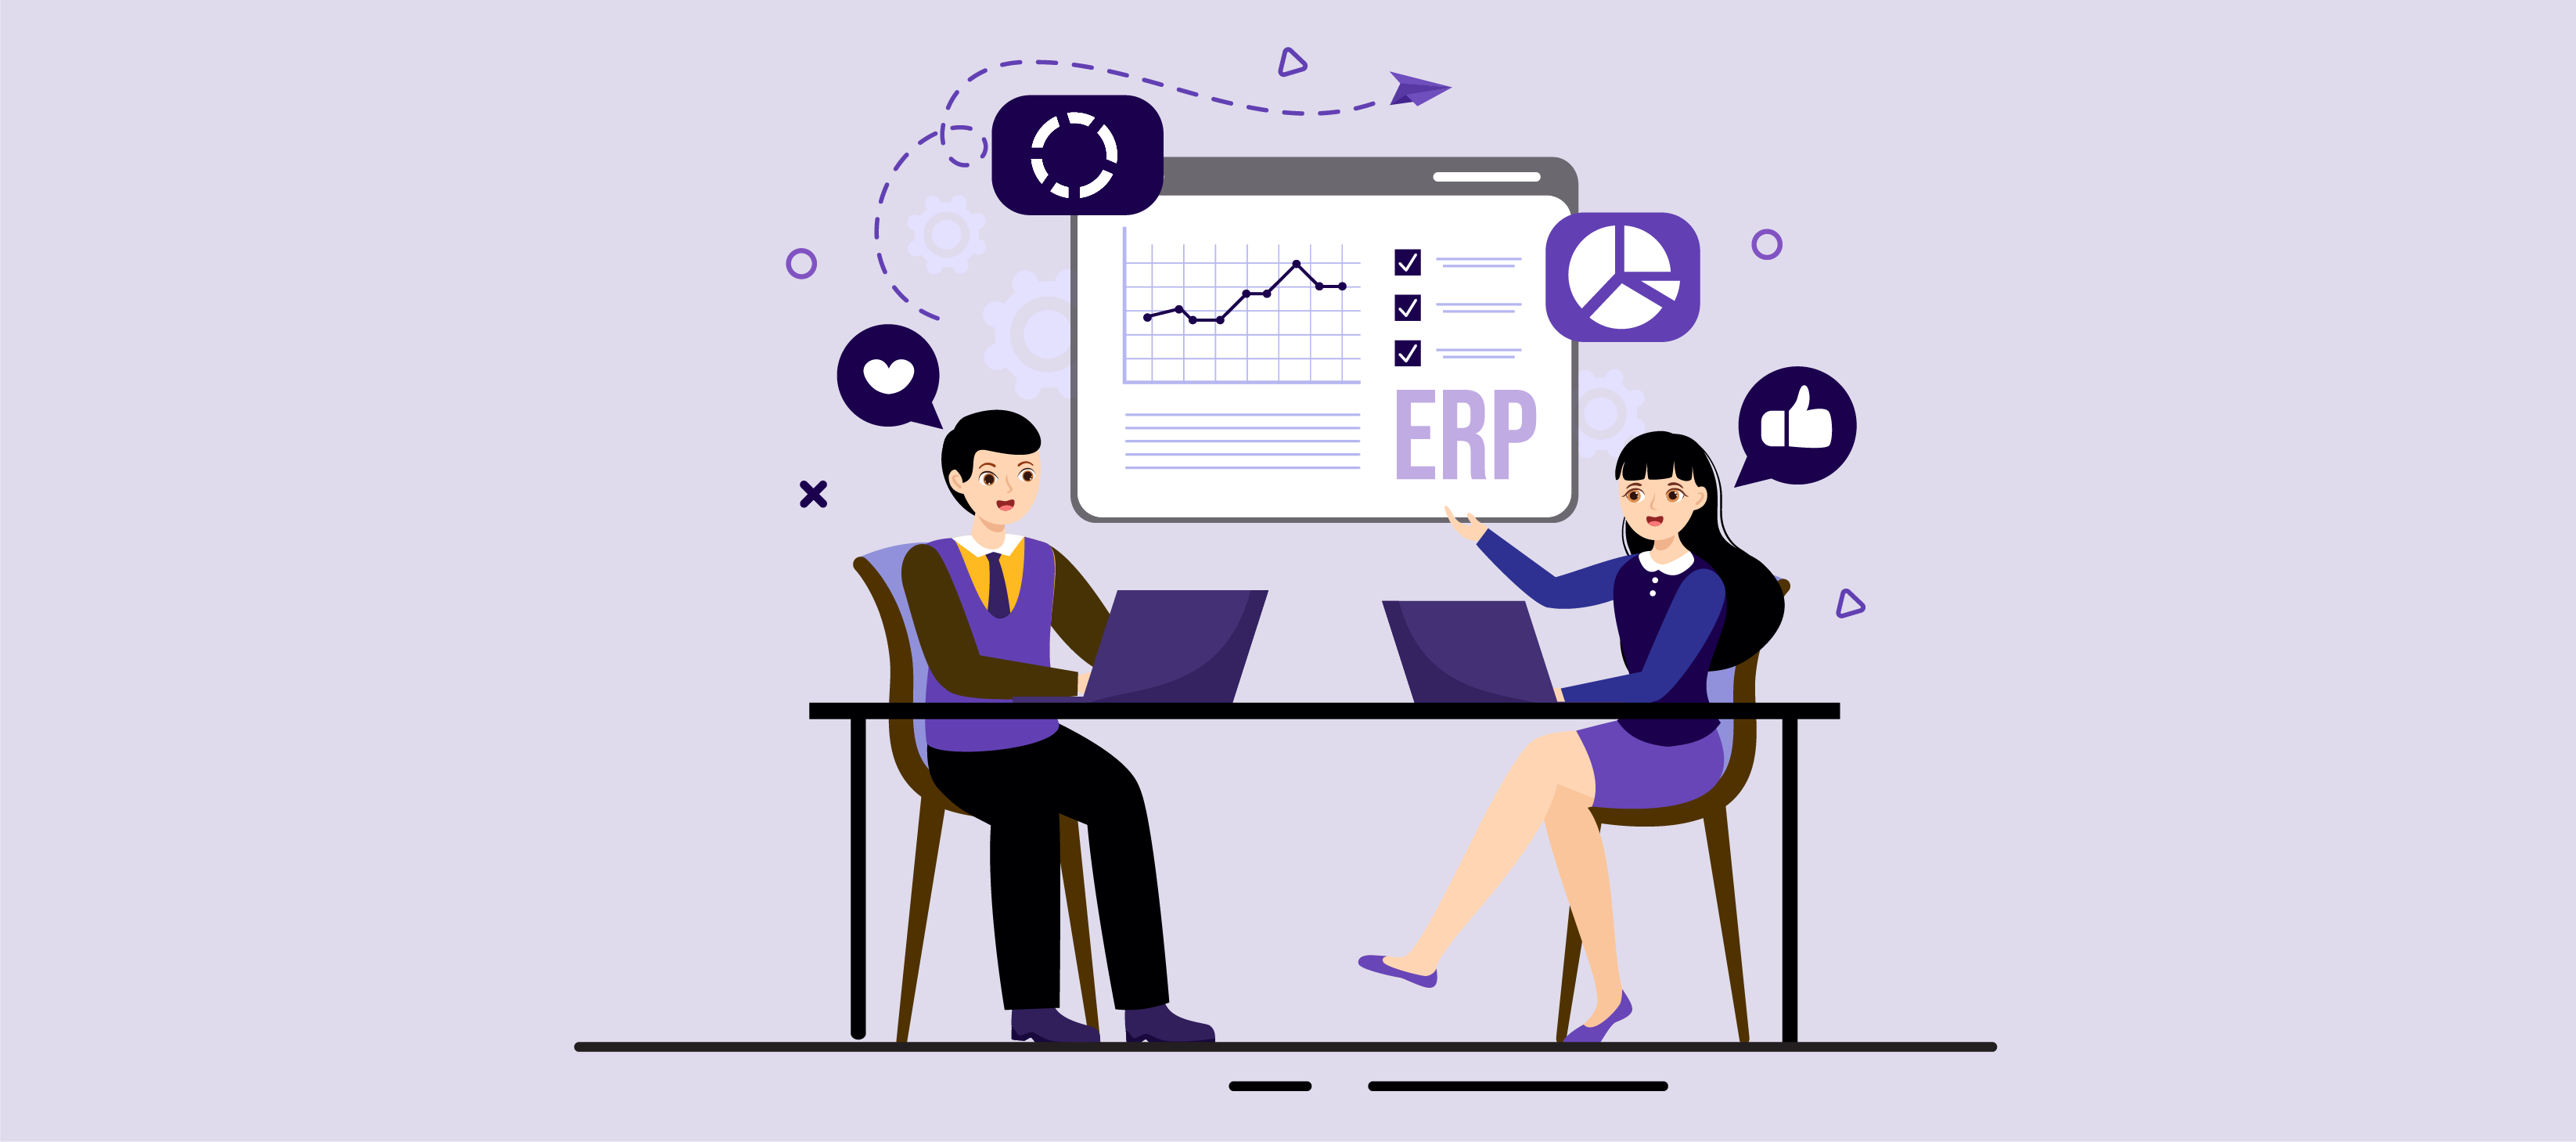 What exactly is ERP?